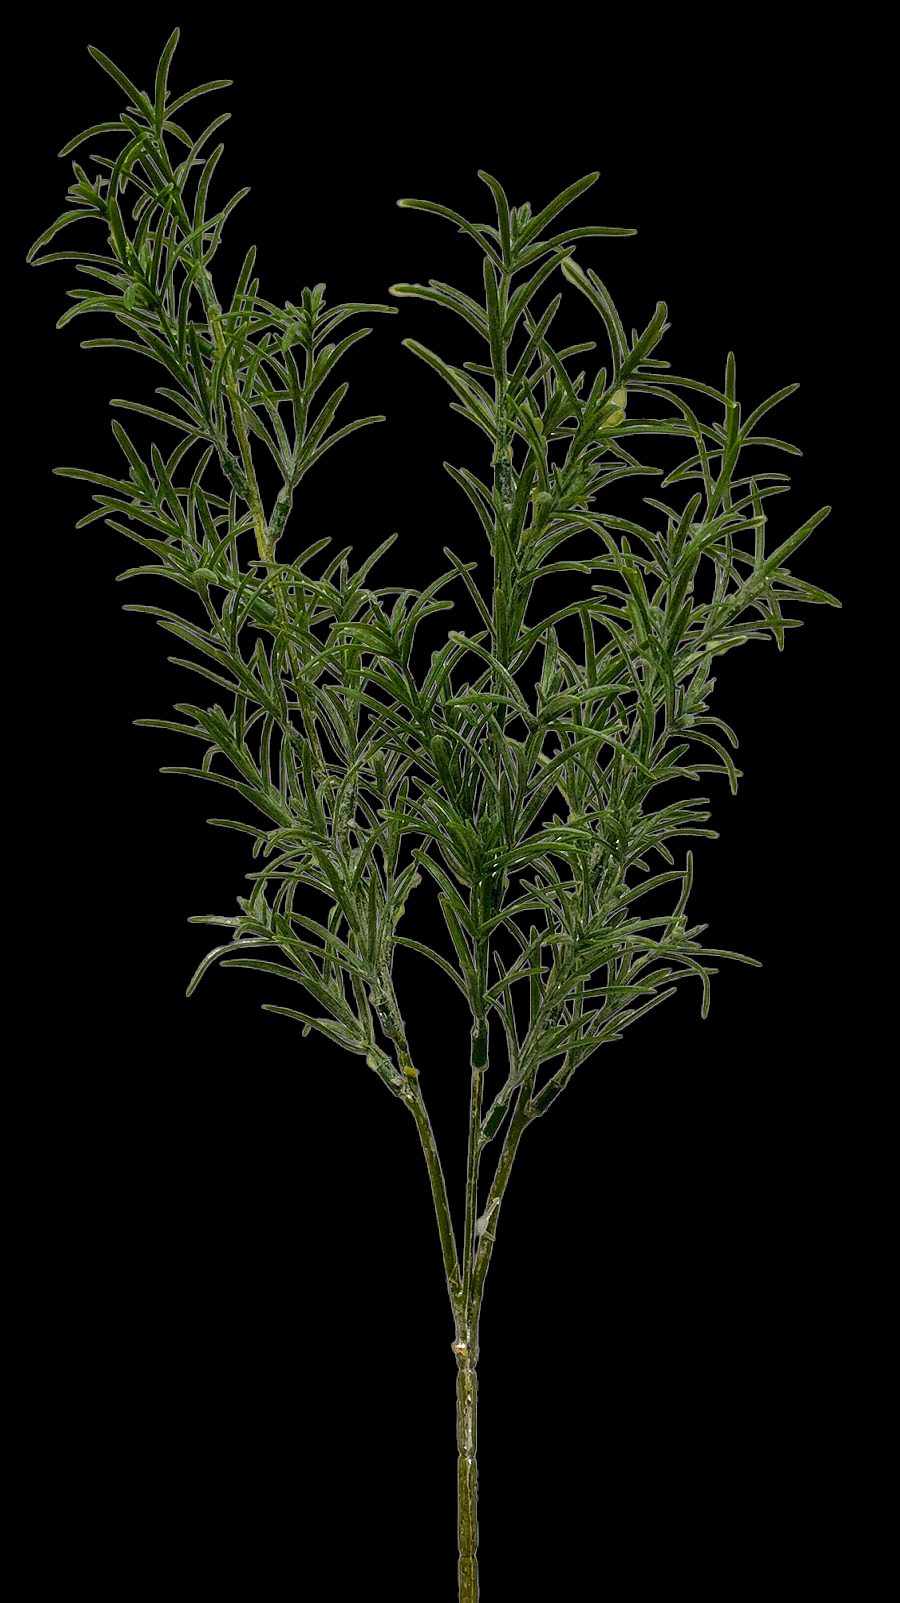 Frosted Green Rosemary Branch x 3
26"